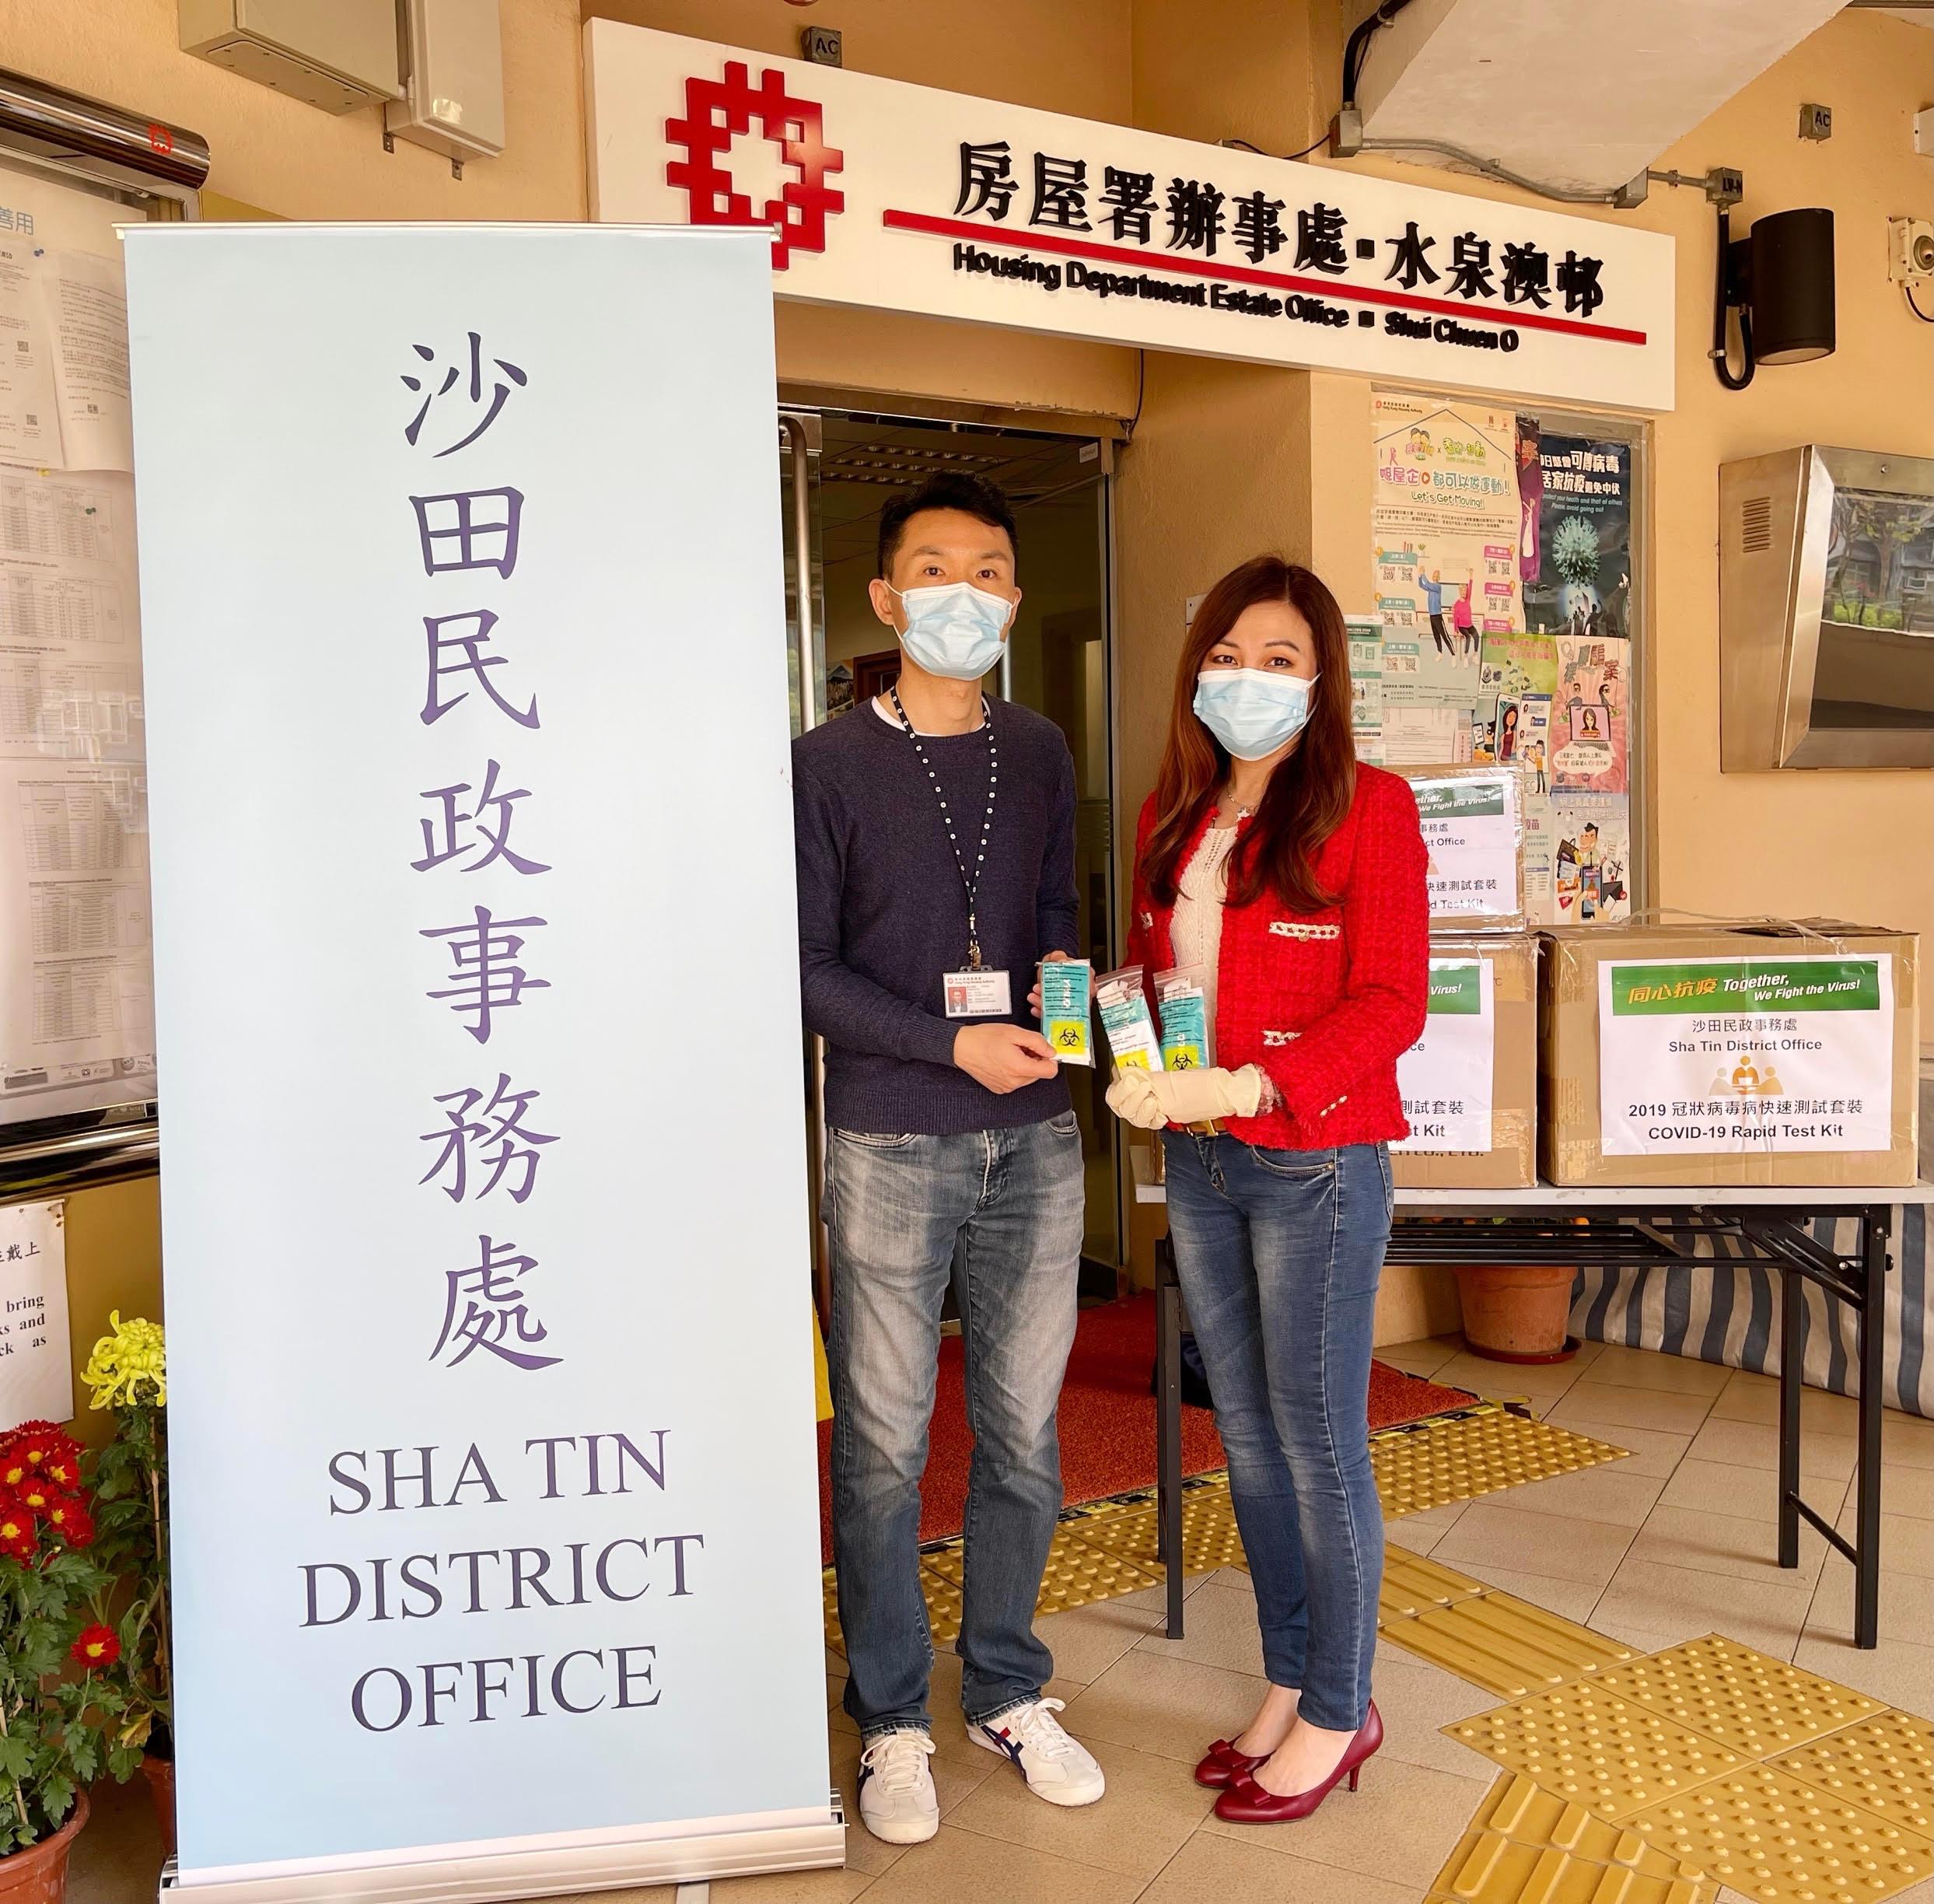 The Sha Tin District Office today (February 12) distributed rapid test kits to households, cleansing workers and property management staff living and working in Mau Chuen House for voluntary testing through the property management company of Shui Chuen O Estate.